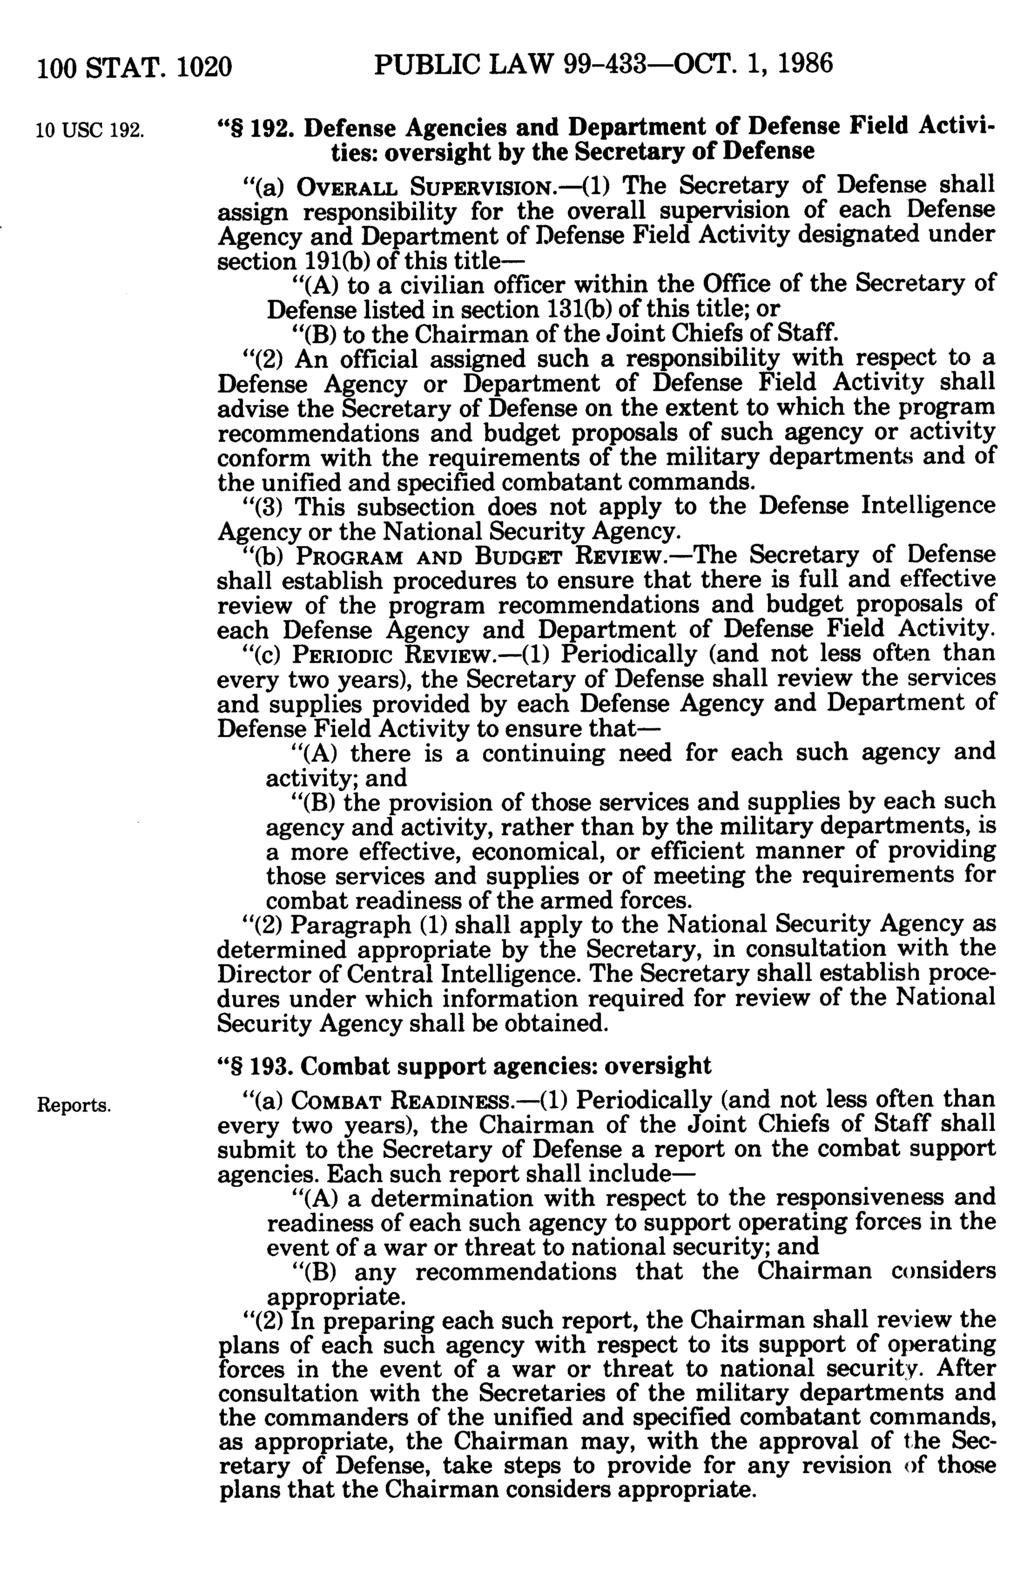 100 STAT. 1020 PUBLIC LAW 99-433-OCT. 1, 1986 10 USC 192. 192. Defense Agencies and Department of Defense Field Activities: oversight by the Secretary of Defense (a) OVERALL SUPERVISION.